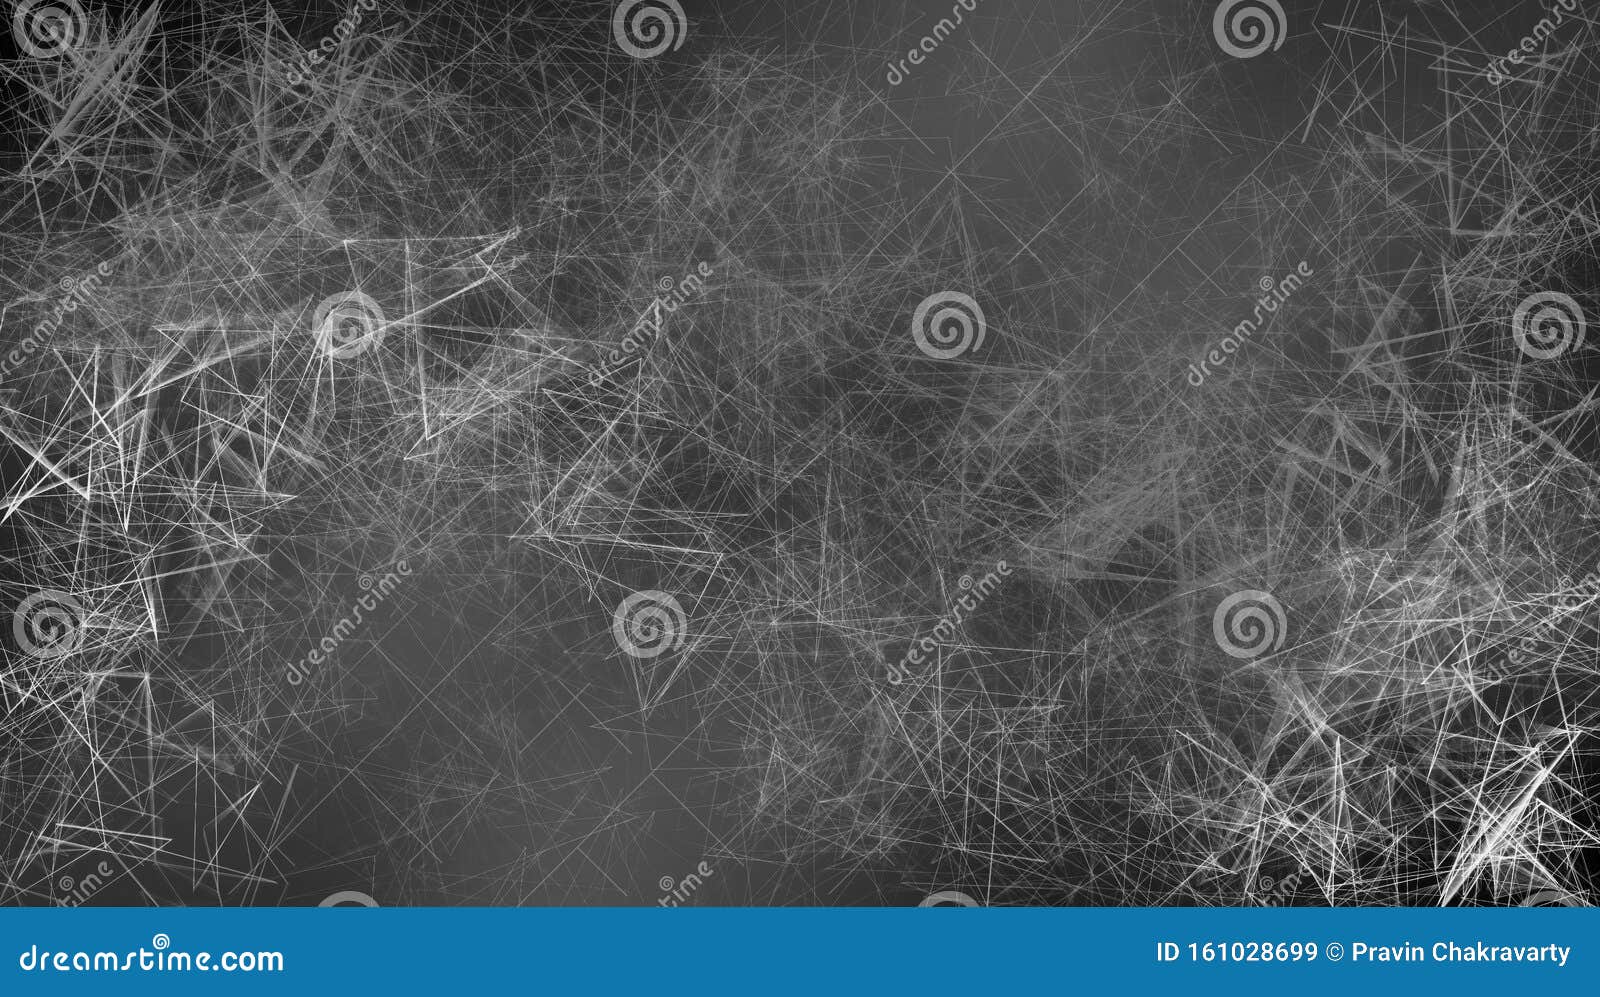 Grey Abstract Textured Background. Grunge Distorted Decay Texture  Background Wallpaper Stock Illustration - Illustration of connection, bars:  161028699